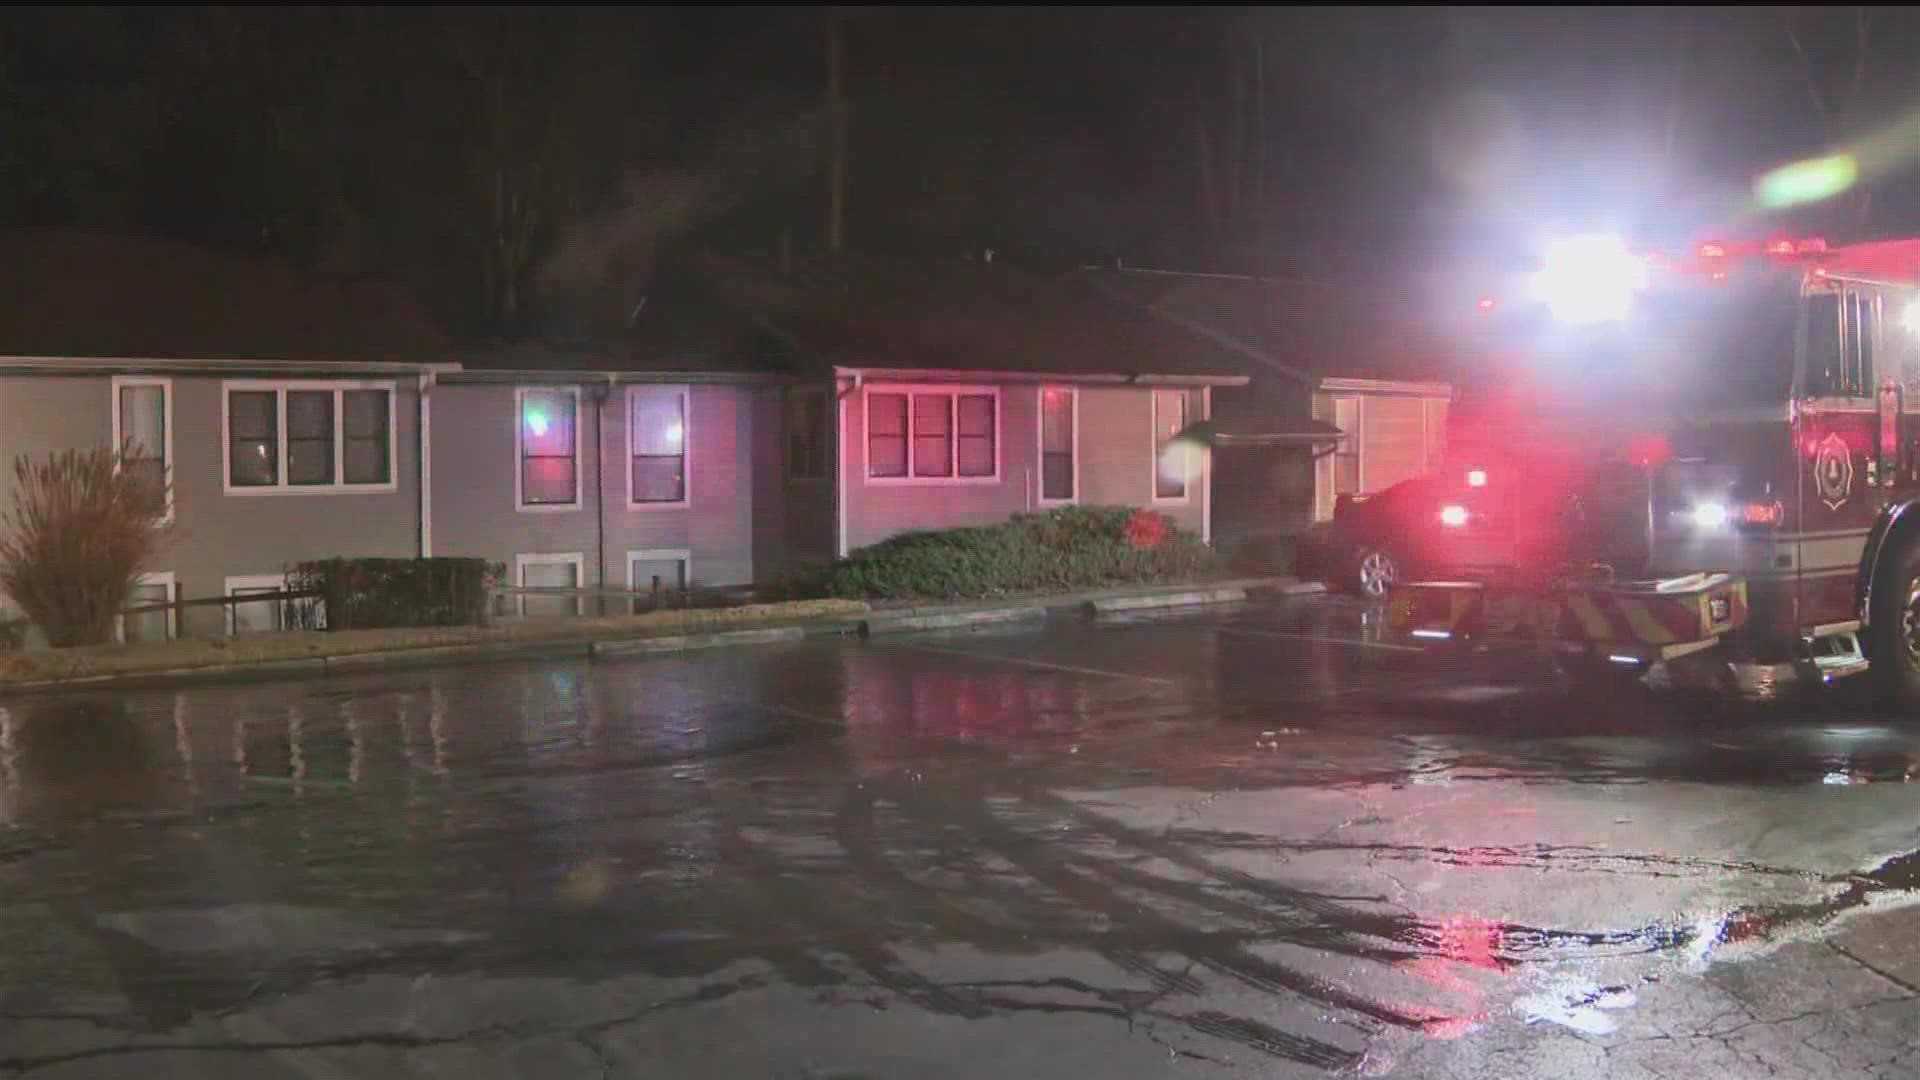 A total of 14 fire units responded to the fire. Twenty apartments were affected –10 of those apartments were damaged, according to Cobb County Fire.